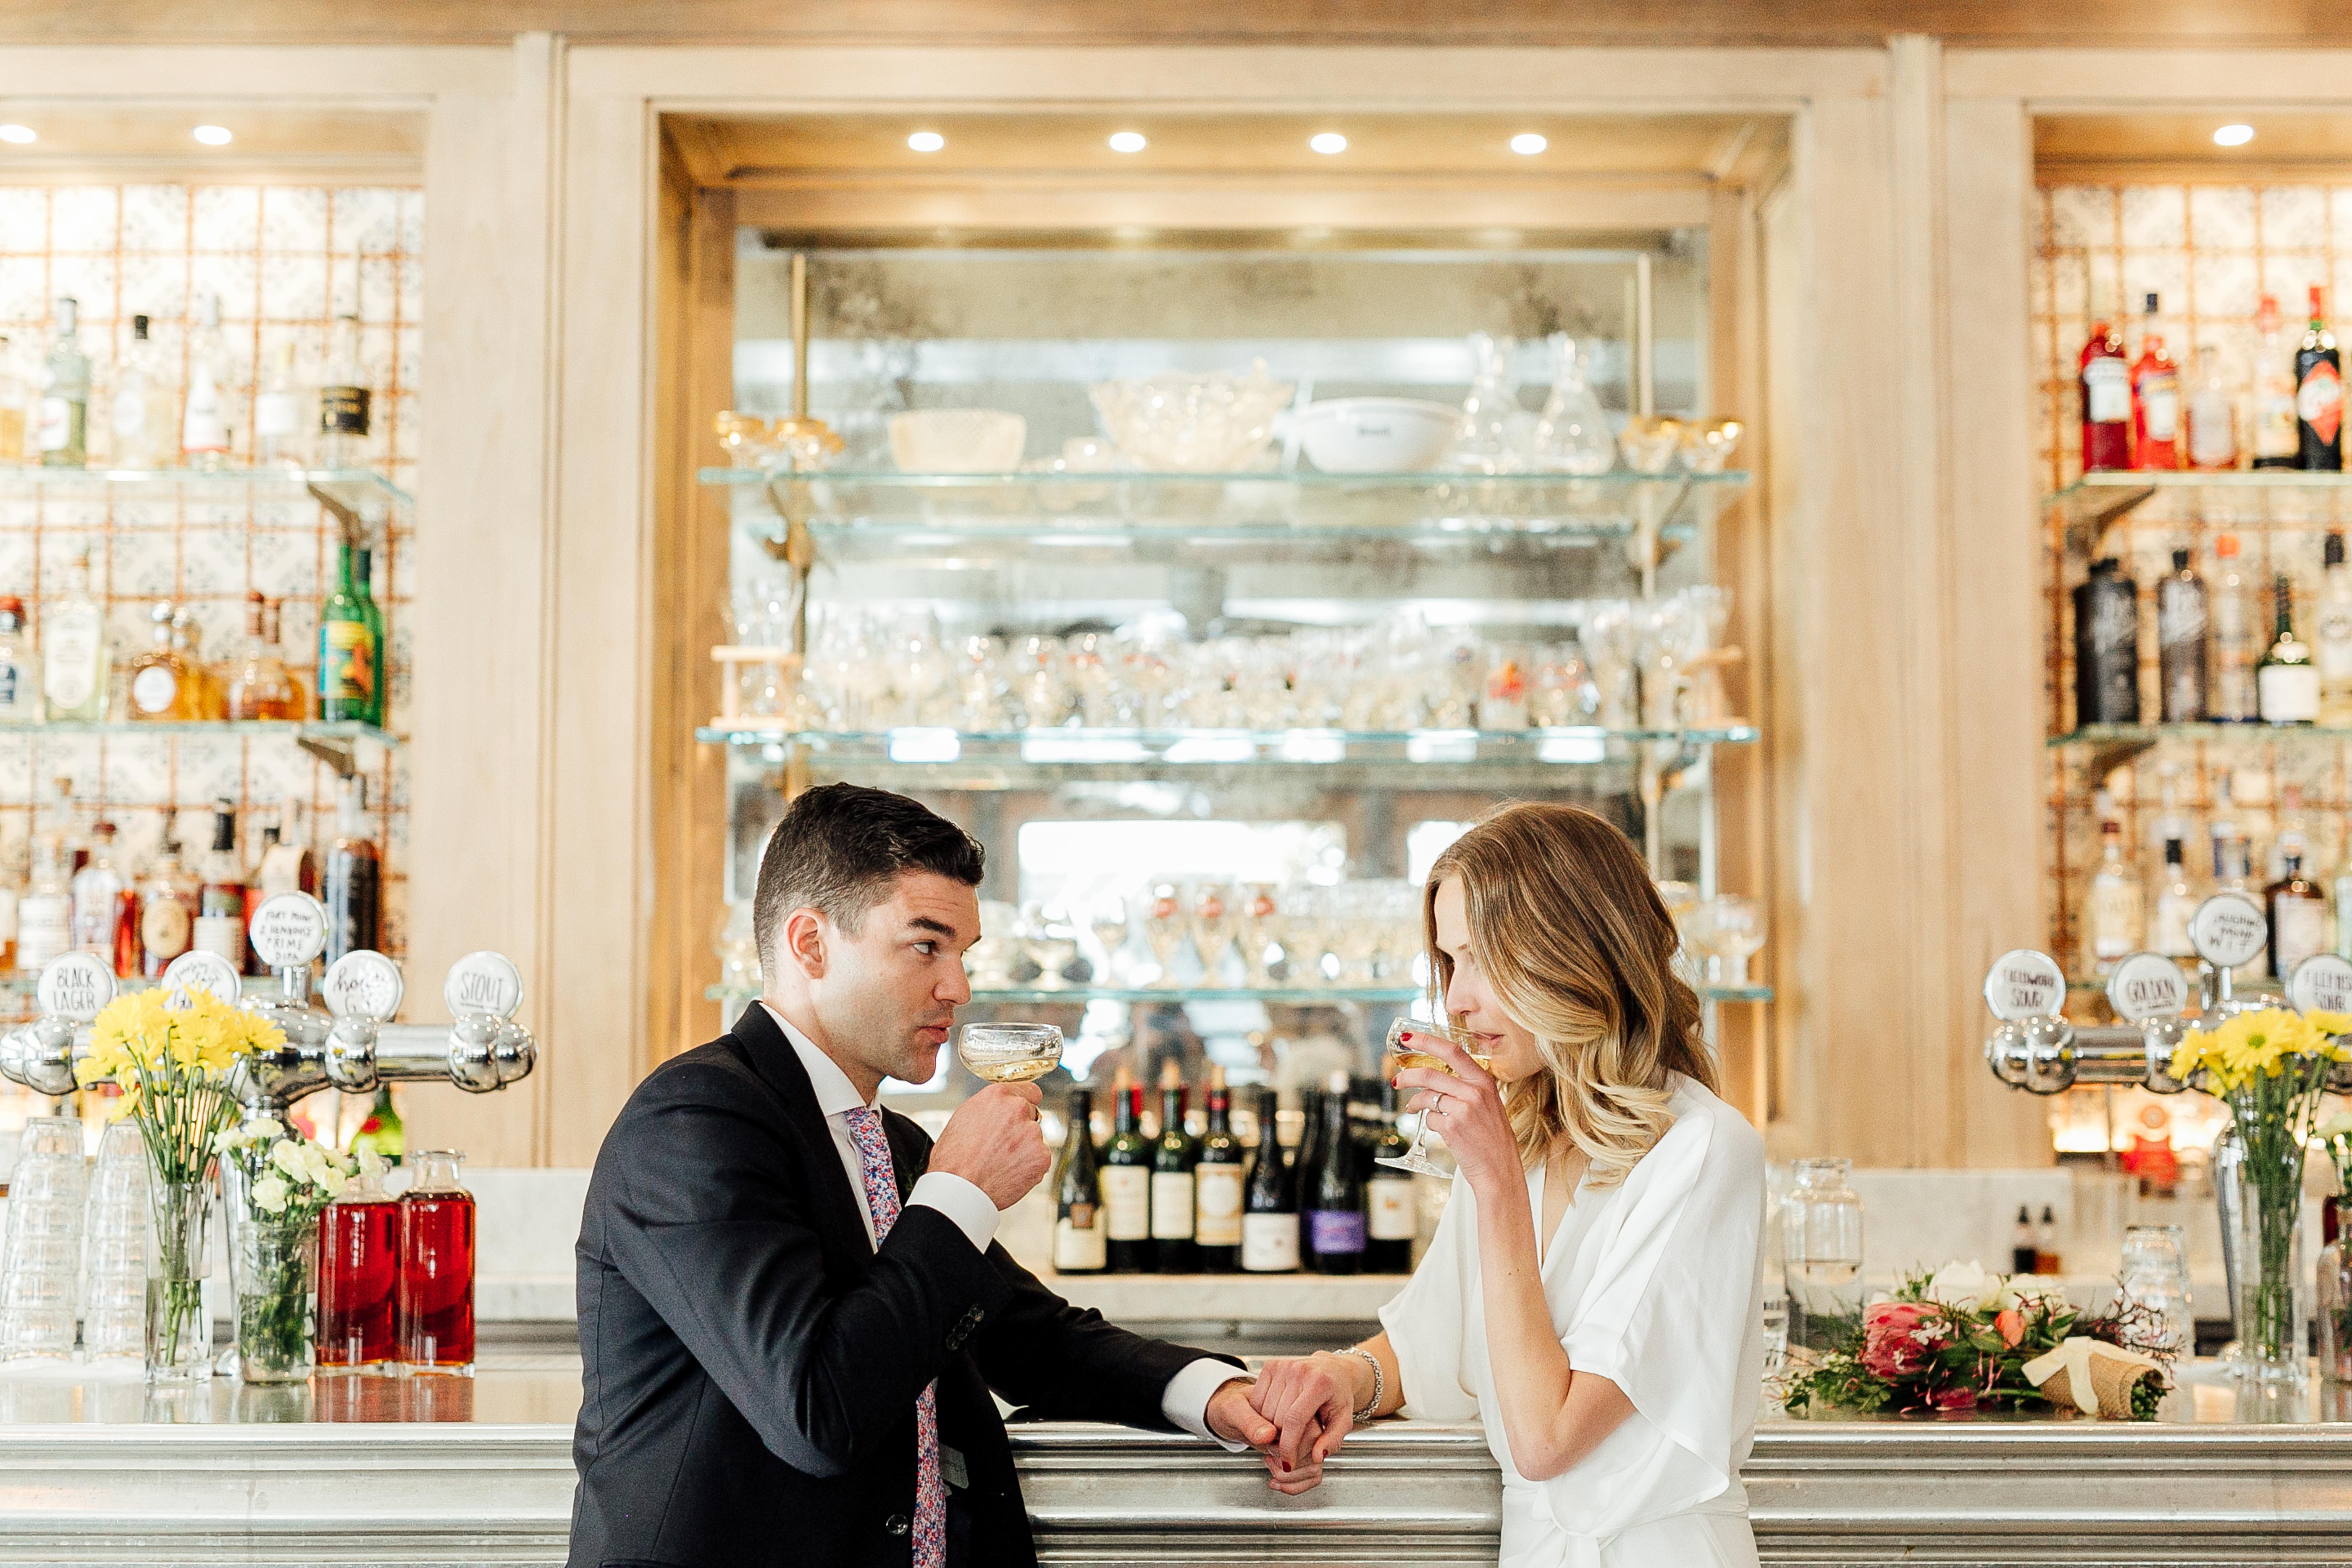 ethically dressed bride and her husband on their wedding day with champagne in San Francisco